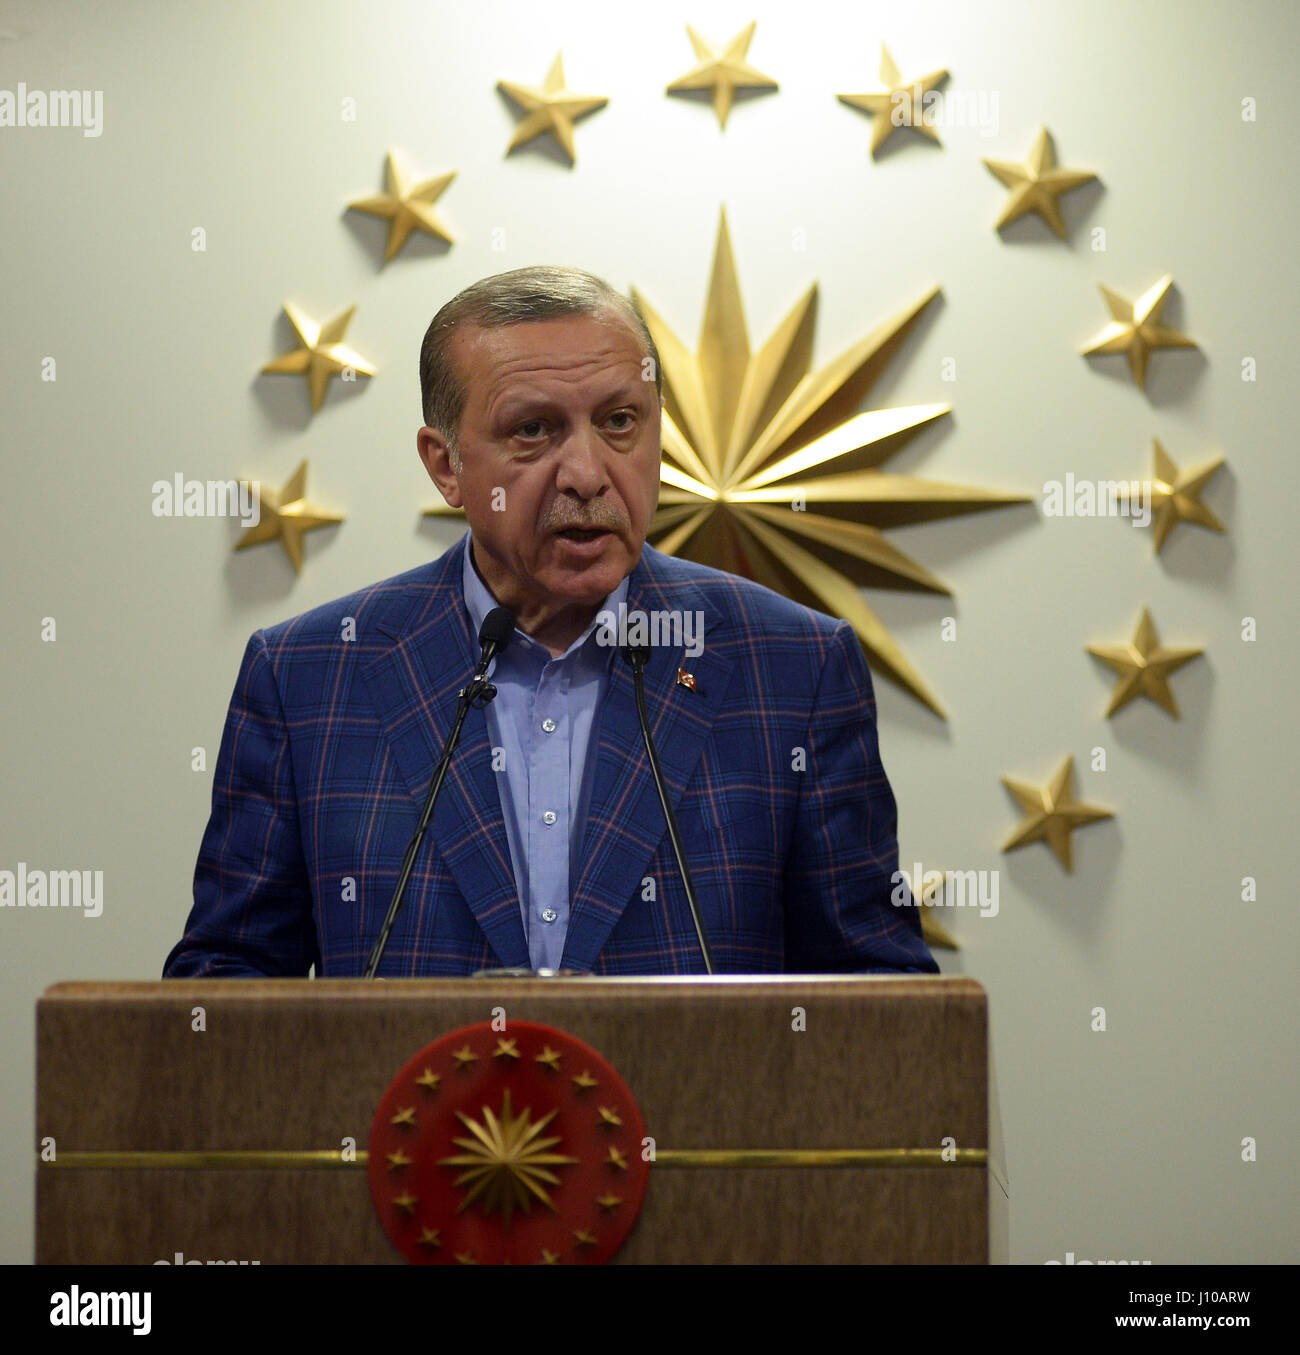 Istanbul, Turkey. 16th Apr, 2017. Turkish President Recep Tayyip Erdogan makes statements in Istanbul, Turkey, on April 16, 2017. Turkish President Recep Tayyip Erdogan declared on Sunday night that the proposed constitutional changes were accepted in a referendum, paying the way for the country to introduce the presidential system. Credit: DHA/Depo Photos/Xinhua/Alamy Live News Stock Photo